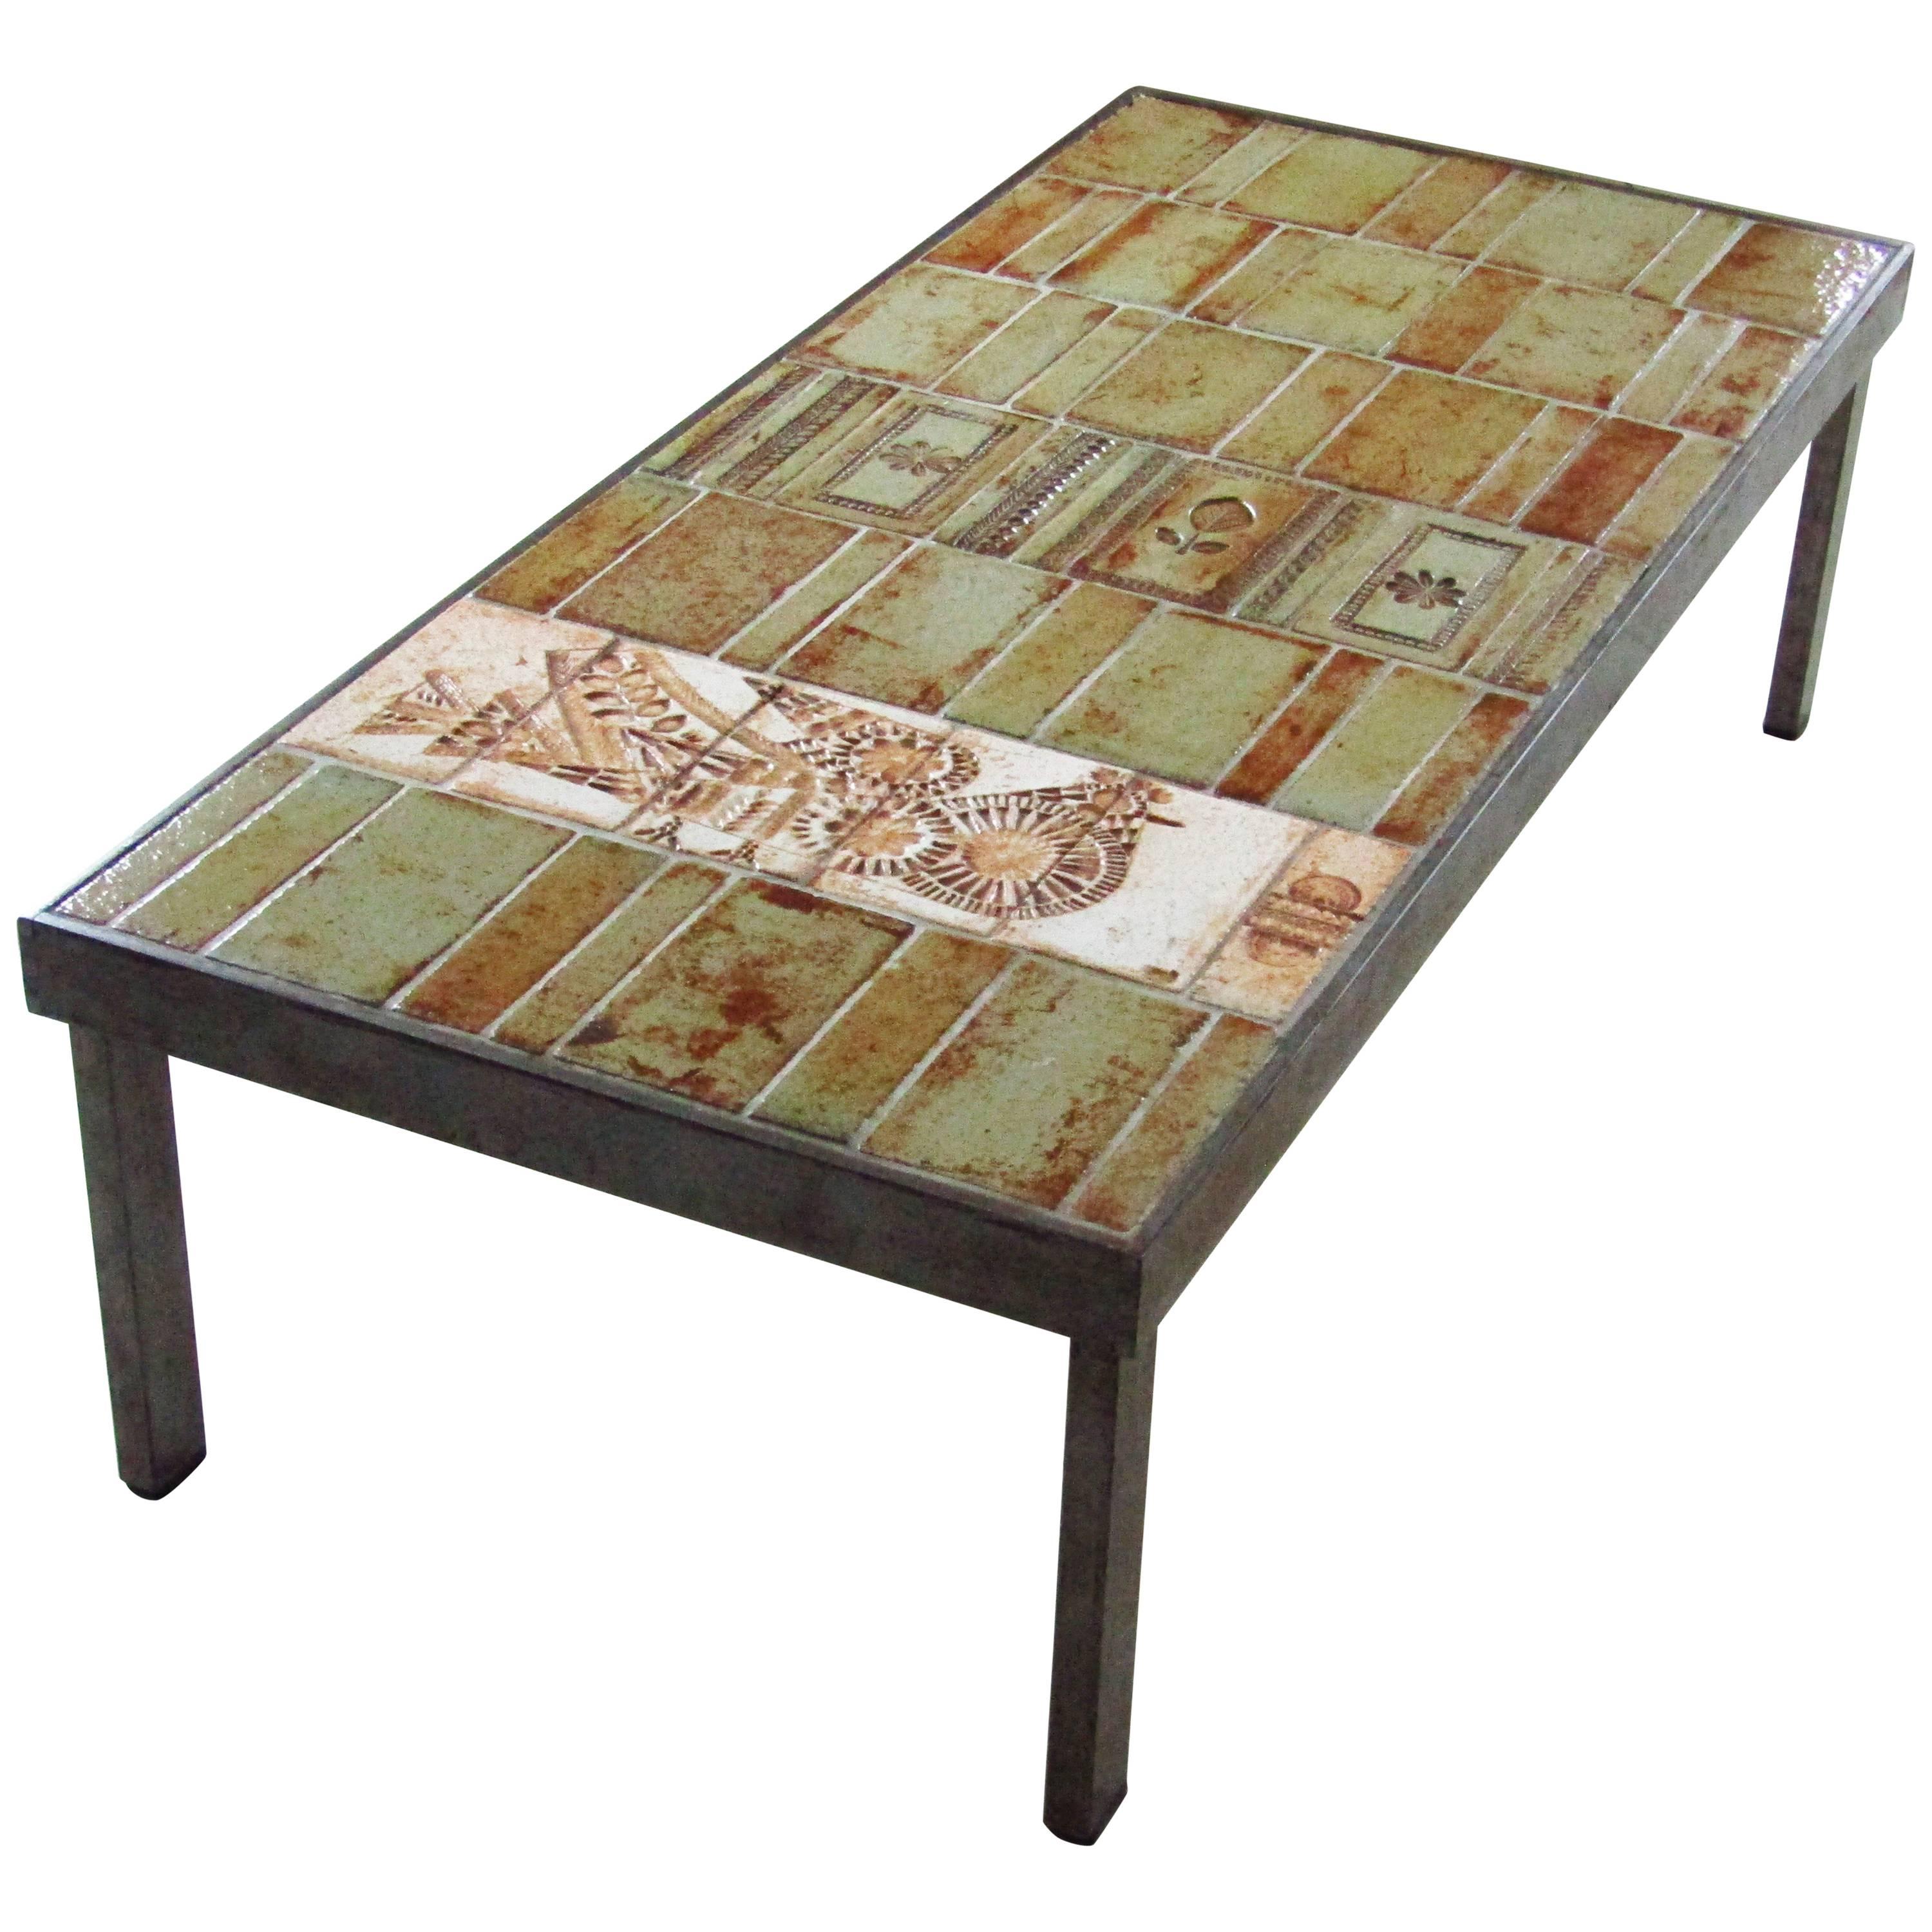 Midcentury French Ceramic Coffee Table by Roger Capron, Vallauris, 1960s